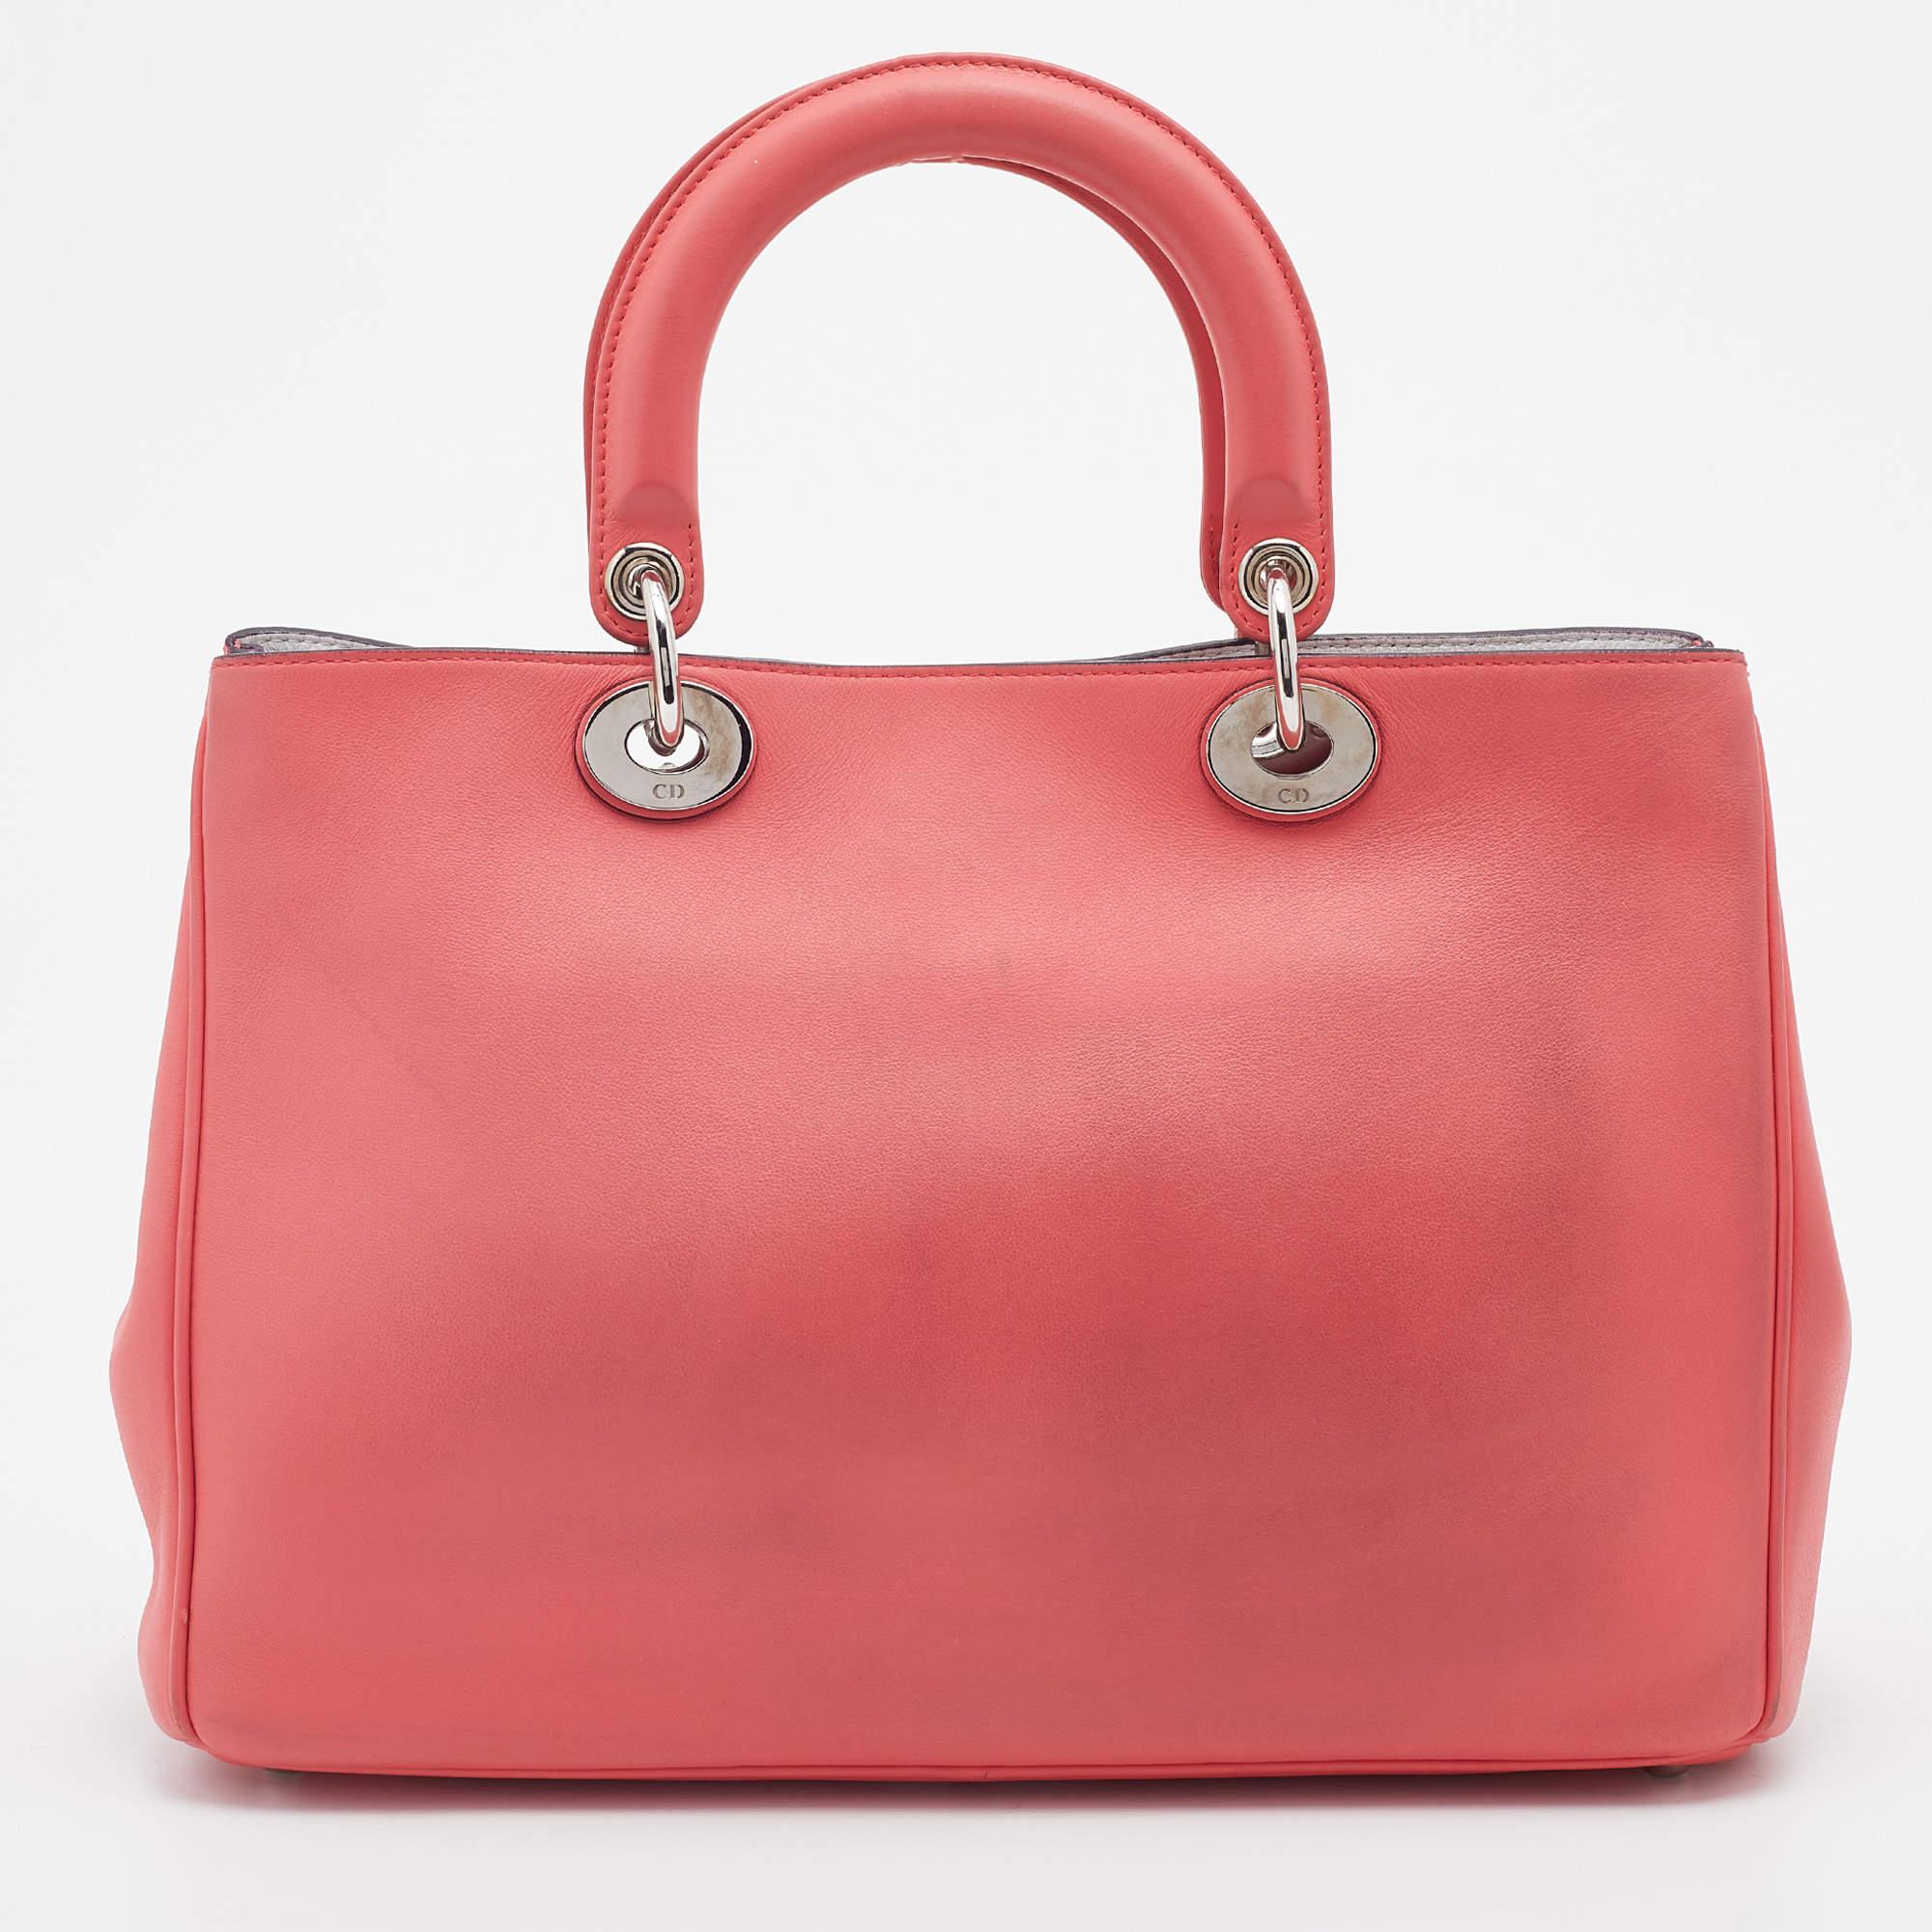 The Diorissimo shopper tote from Dior is a piece that has never gone out of style. This leather tote here comes in a coral pink hue with silver-tone hardware and the iconic Dior letter charms. It features double top handles, a small matching pouch,